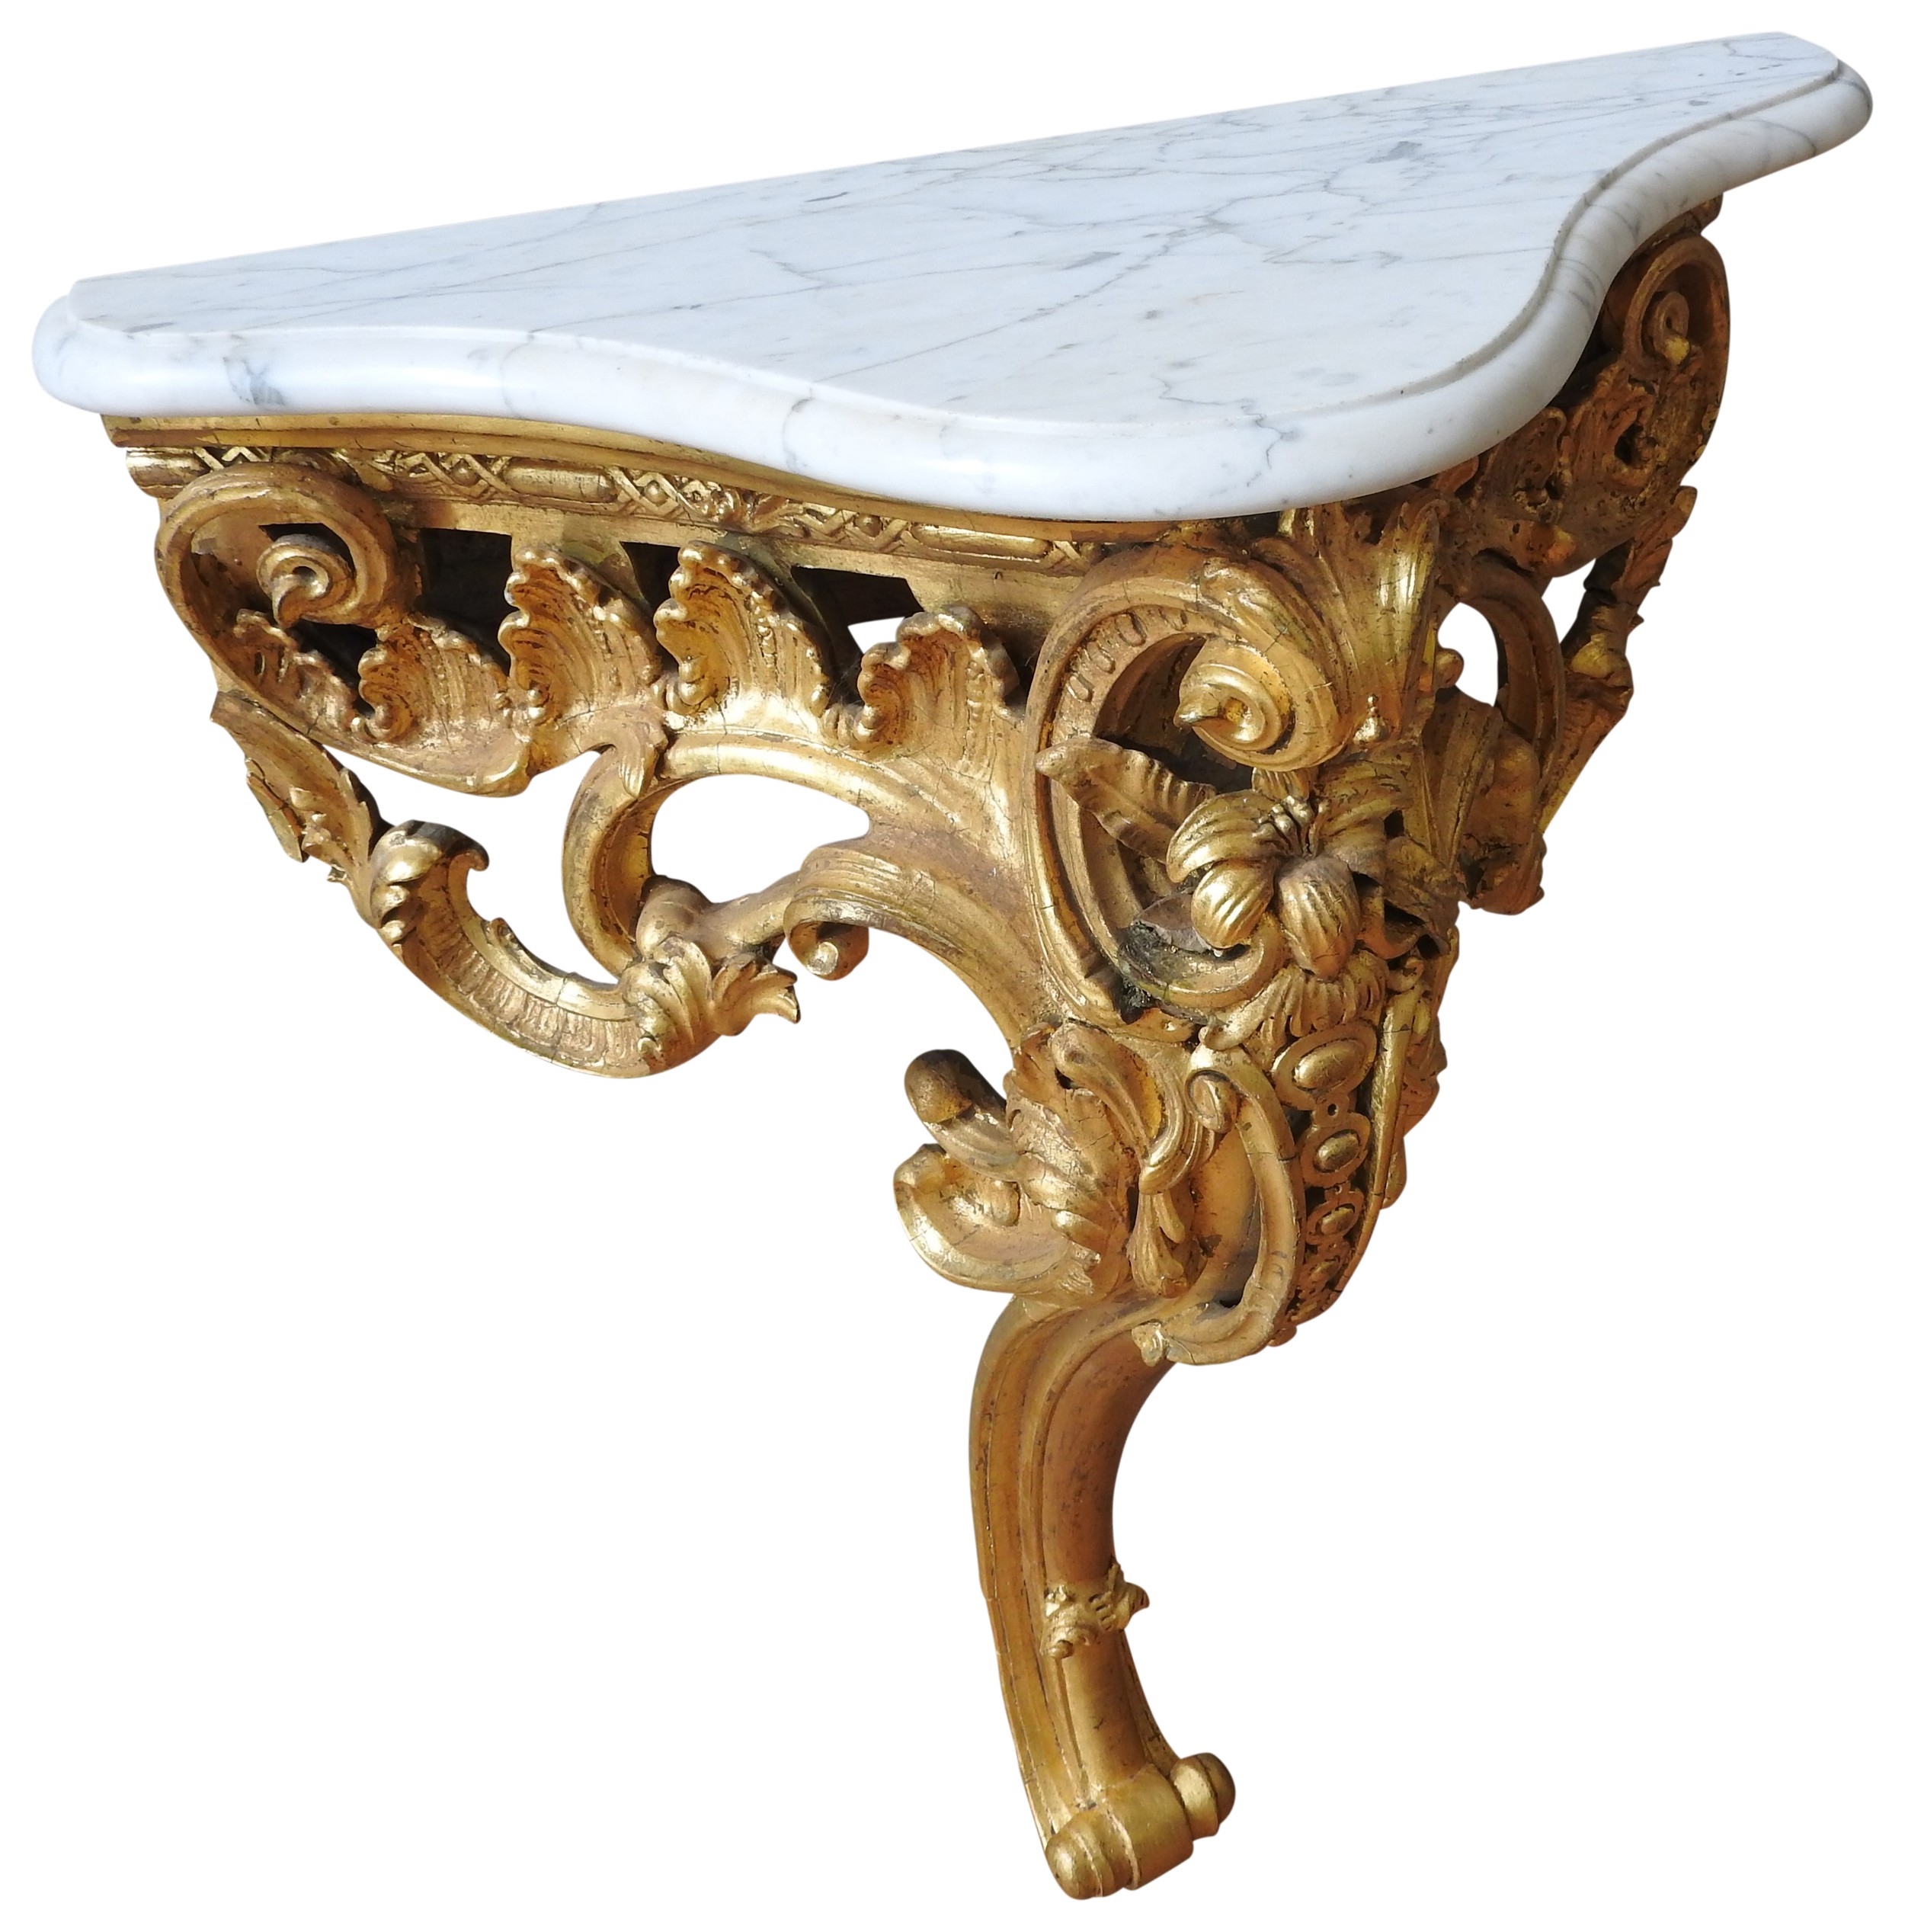 A LATE 19TH CENTURY FRENCH GILT WOOD CONSOLE TABLE, in the Rococo style, ornate carved scroll